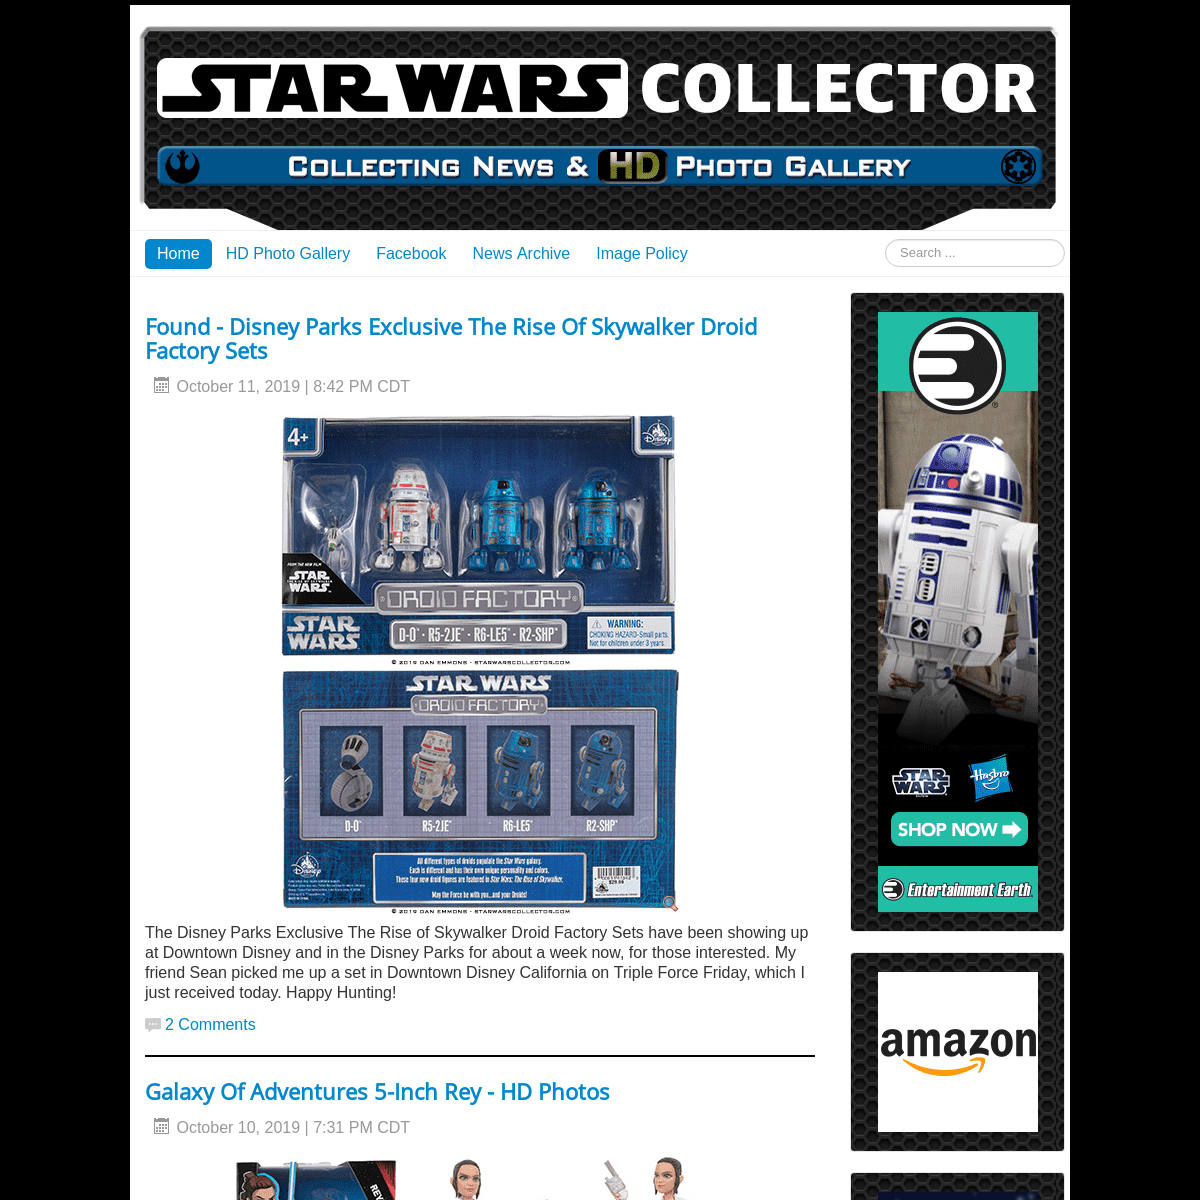 A complete backup of starwarscollector.com